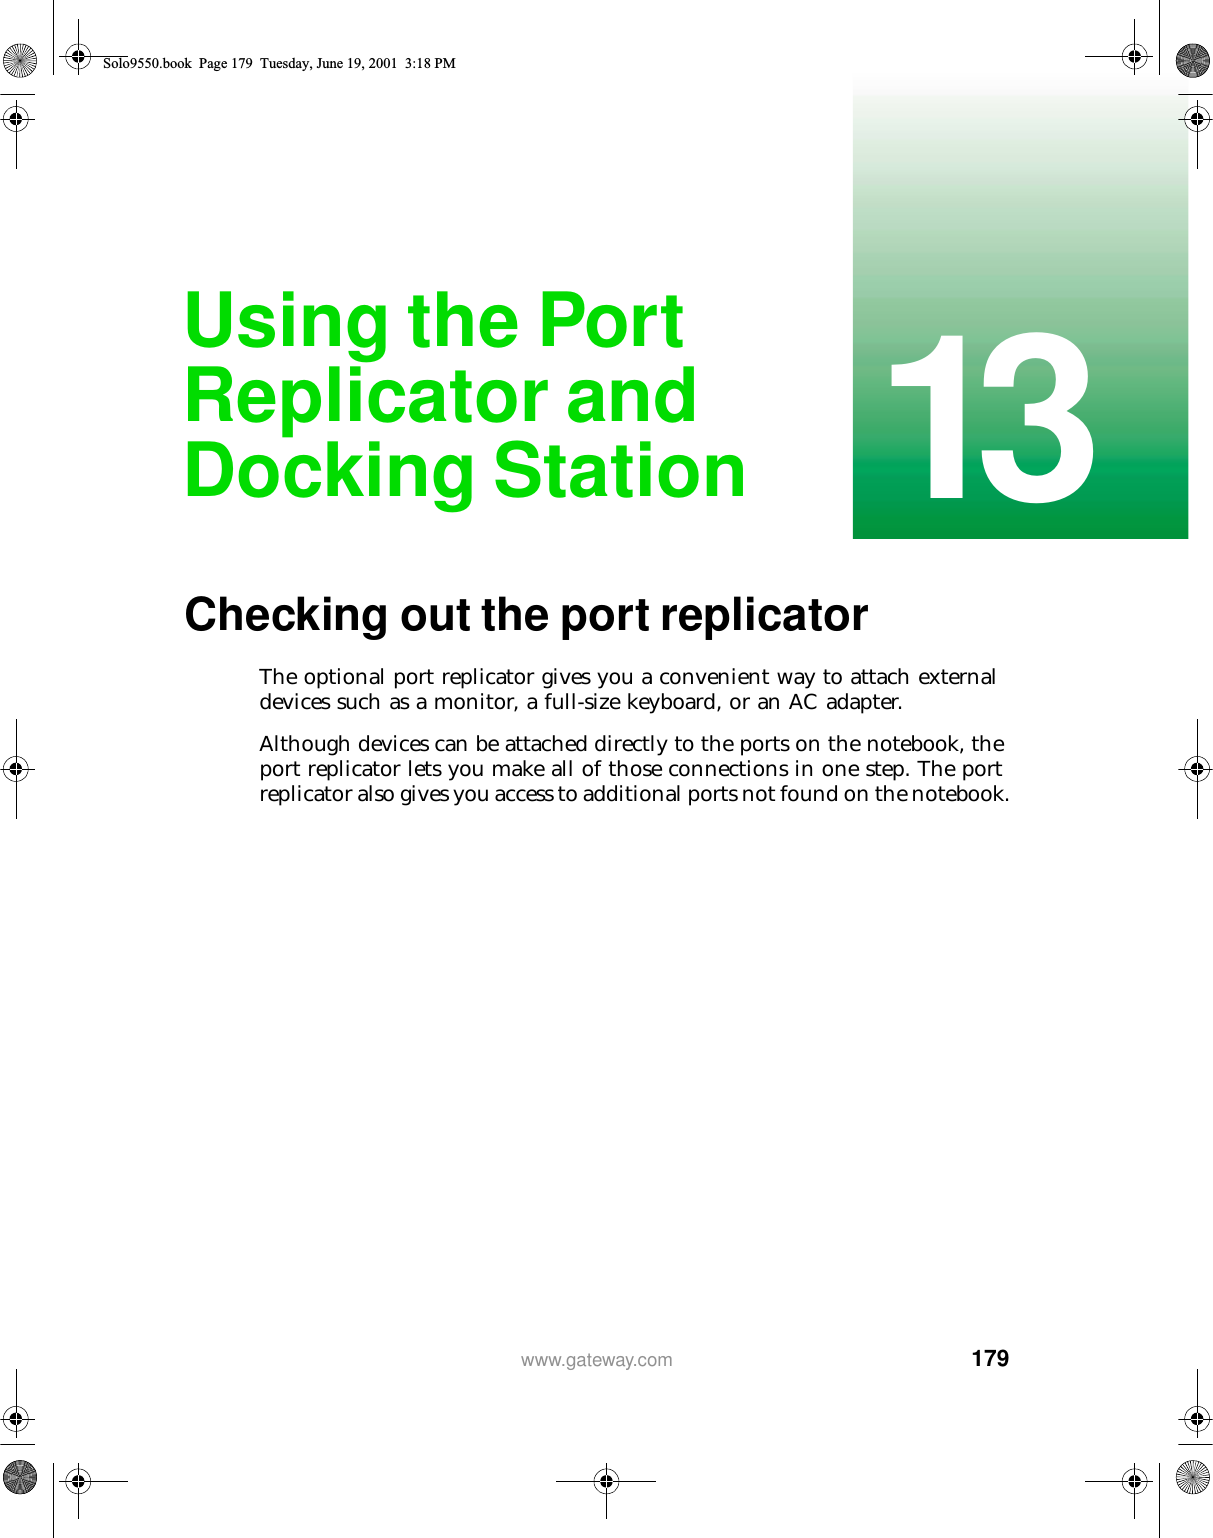 17913www.gateway.comUsing the Port Replicator and Docking StationChecking out the port replicatorThe optional port replicator gives you a convenient way to attach external devices such as a monitor, a full-size keyboard, or an AC adapter.Although devices can be attached directly to the ports on the notebook, the port replicator lets you make all of those connections in one step. The port replicator also gives you access to additional ports not found on the notebook.Solo9550.book Page 179 Tuesday, June 19, 2001 3:18 PM